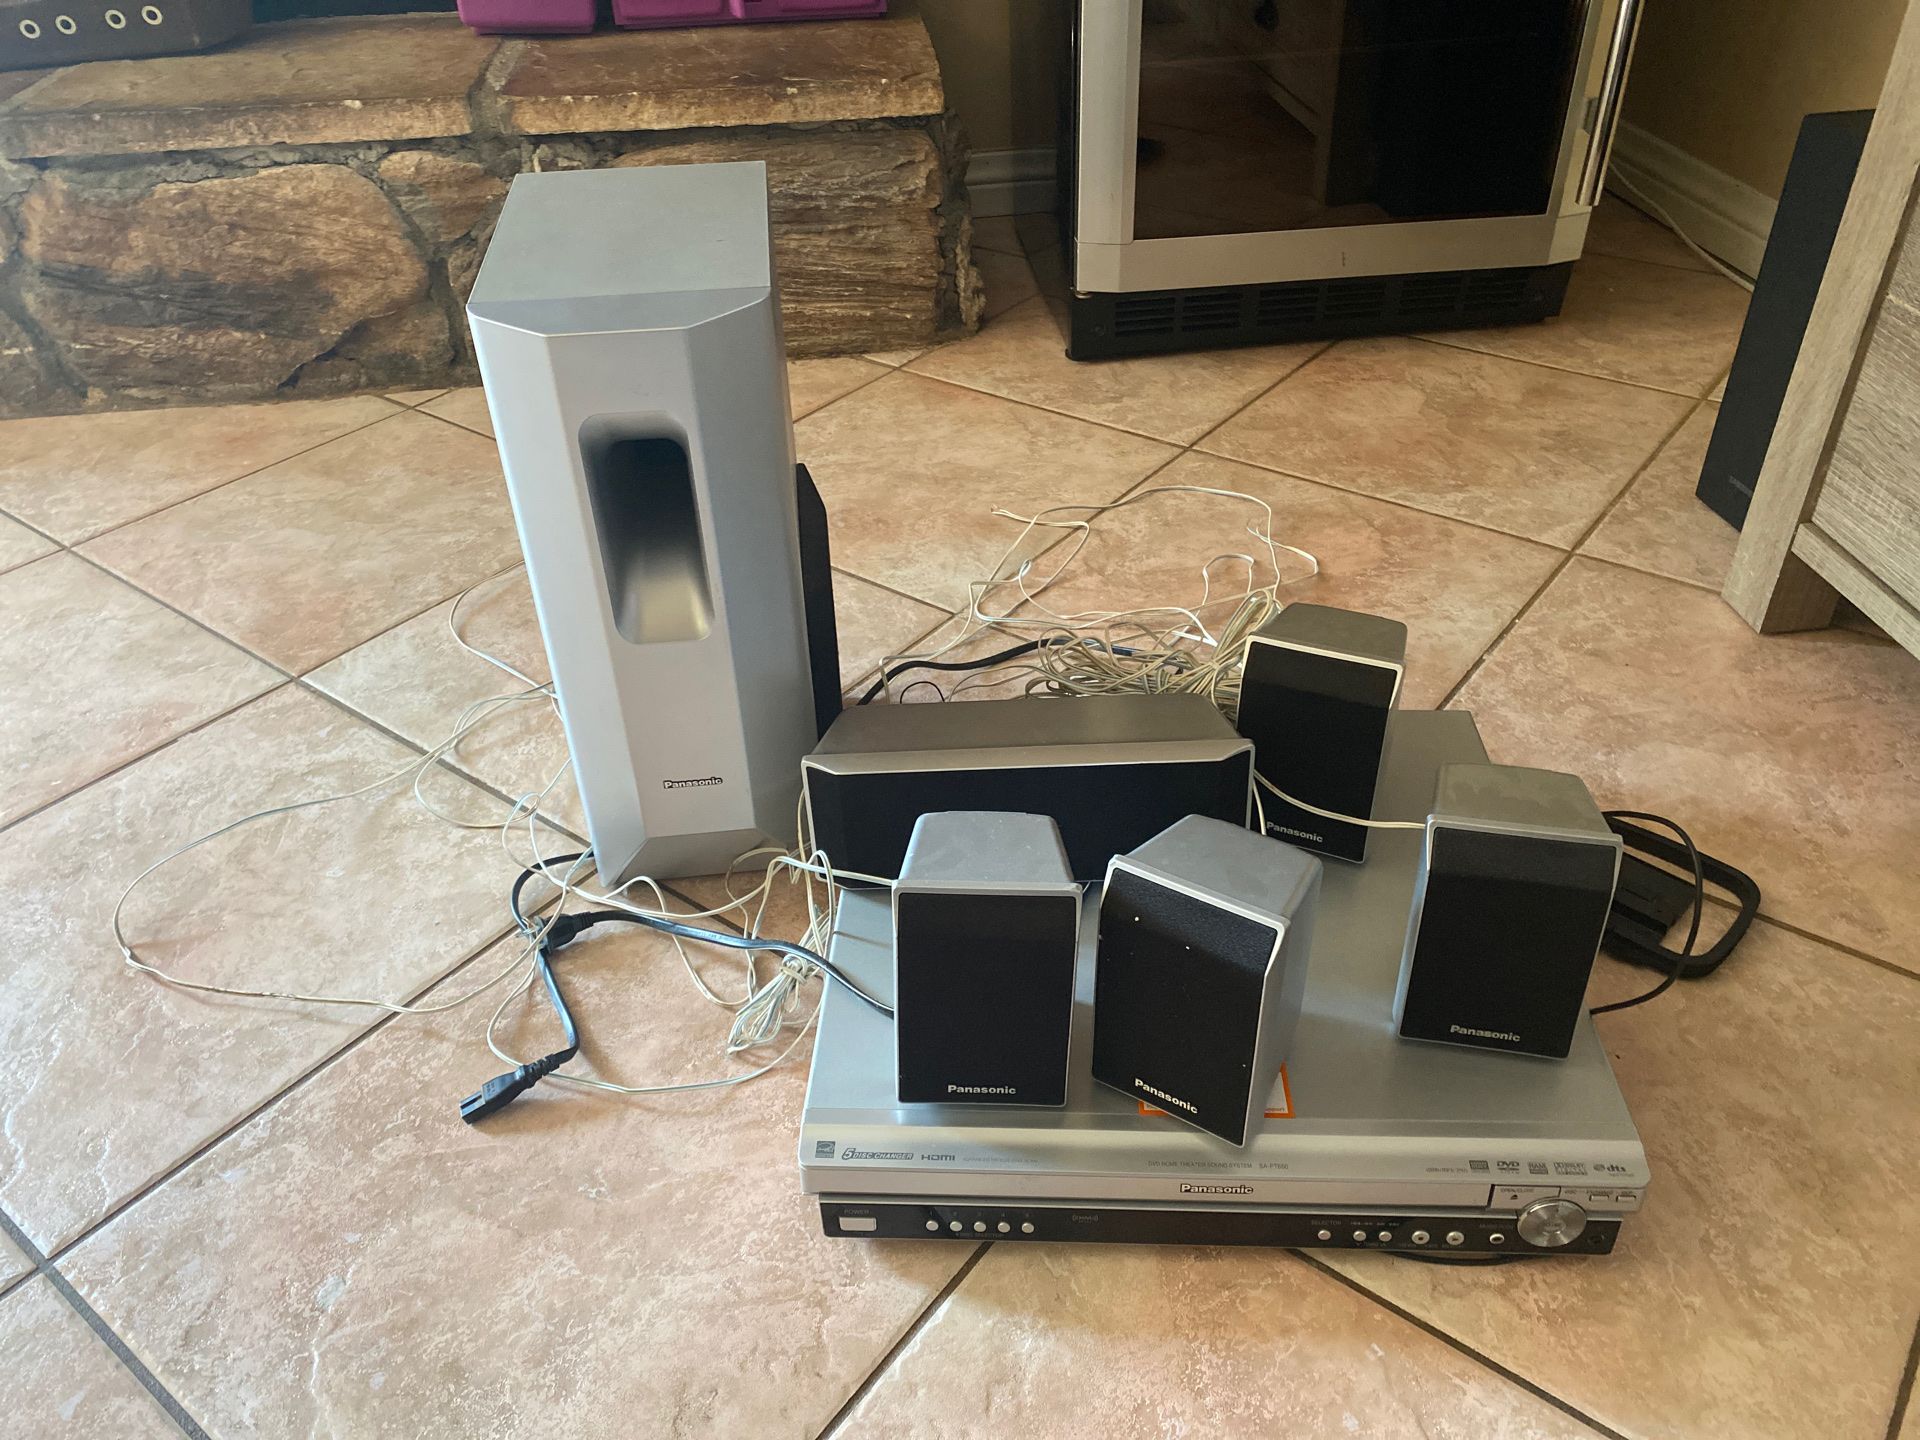 Home theatre 5 dvd an CD players great condition only 40 dollars